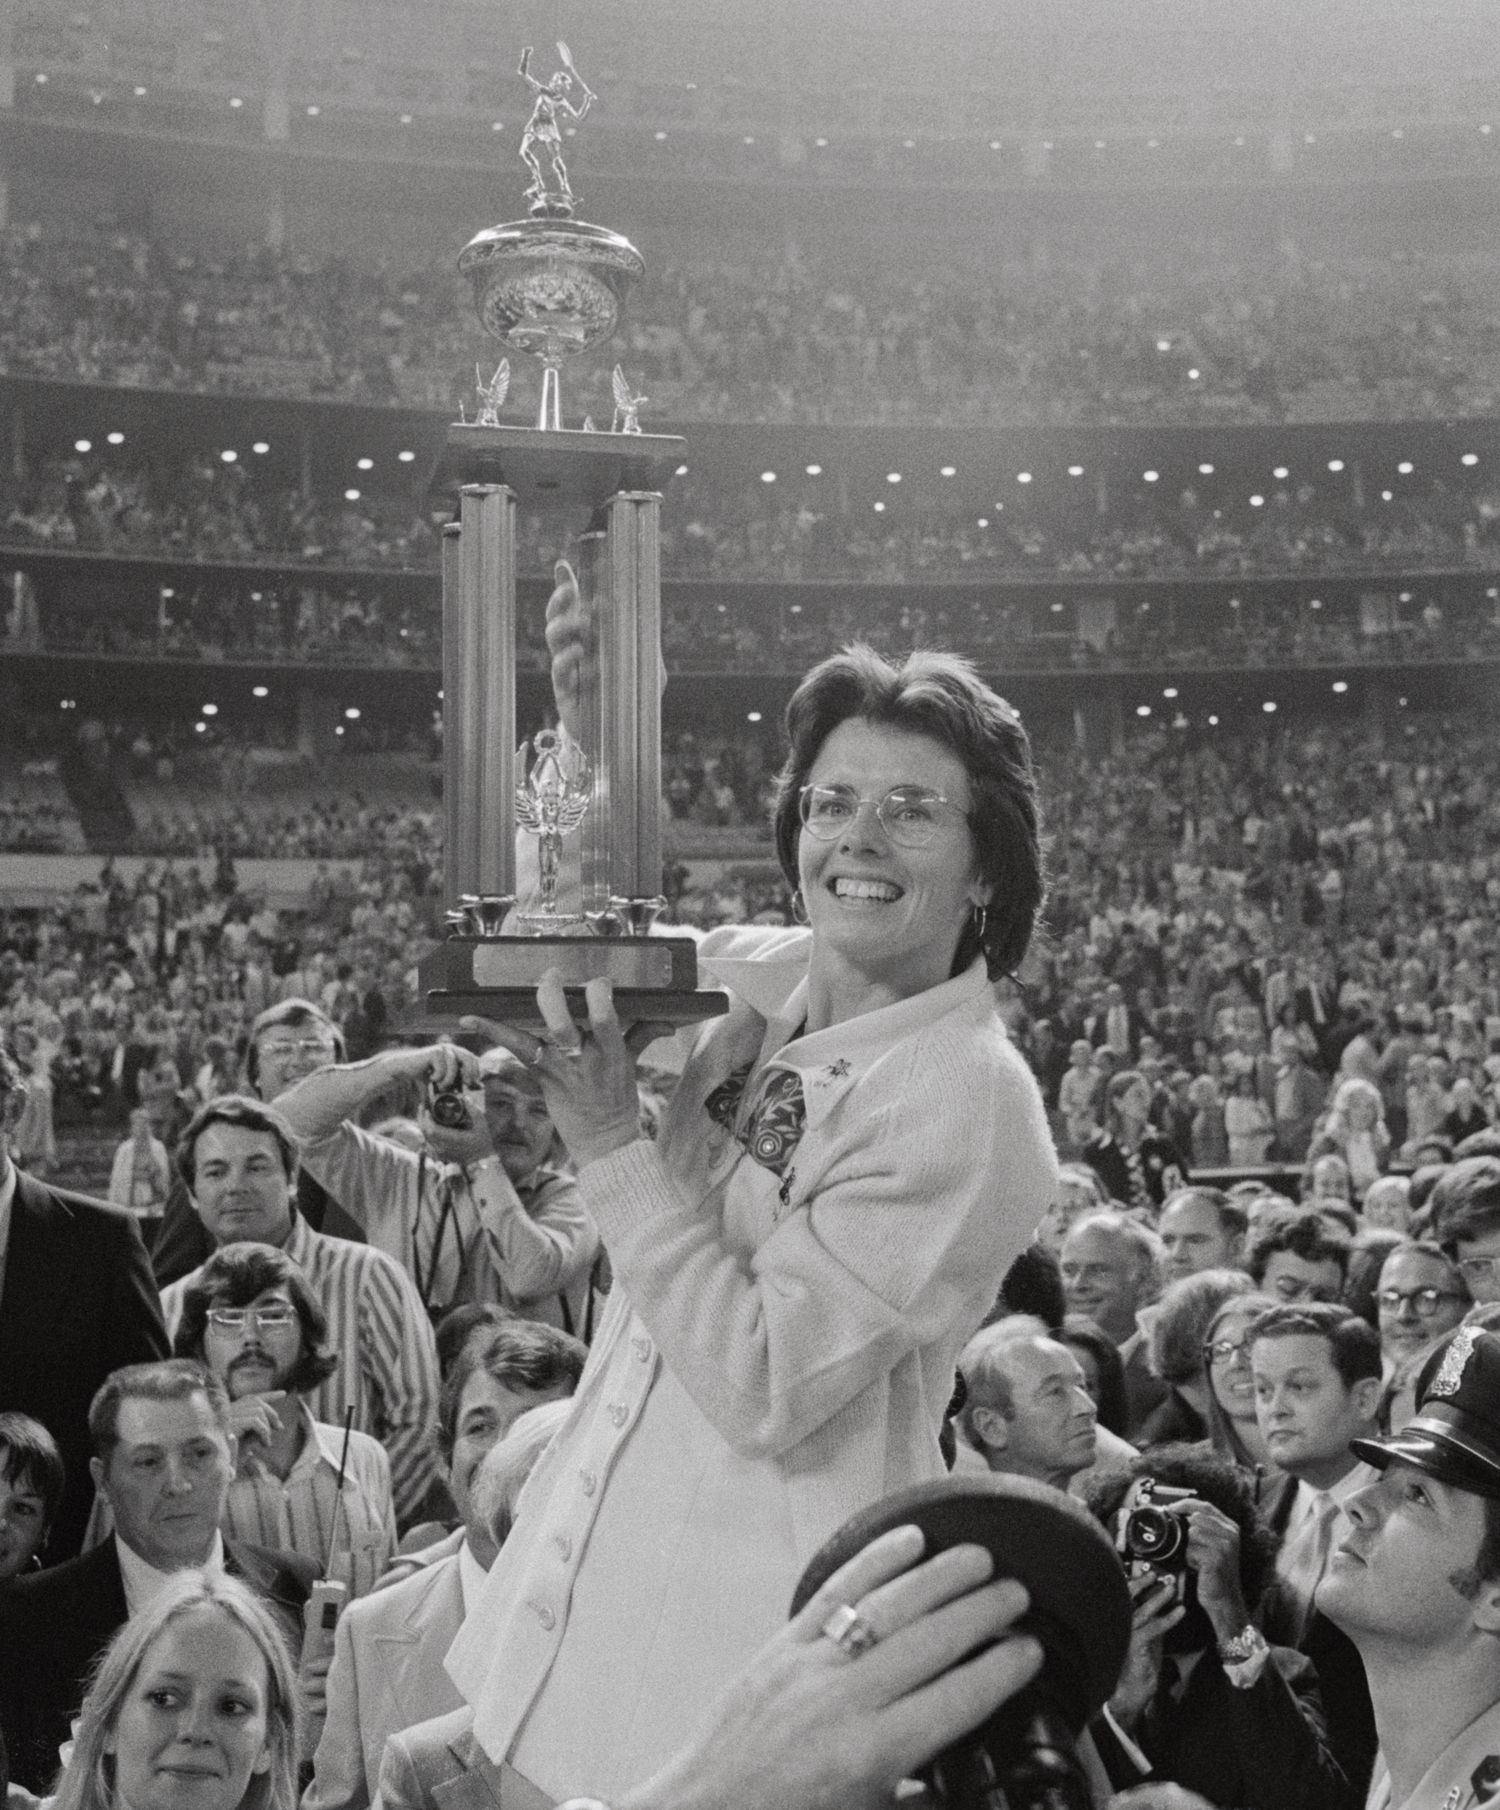 Battle of the Sexes 45 Years on: Billie Jean King Continues the Battle  Against Gender Inequality